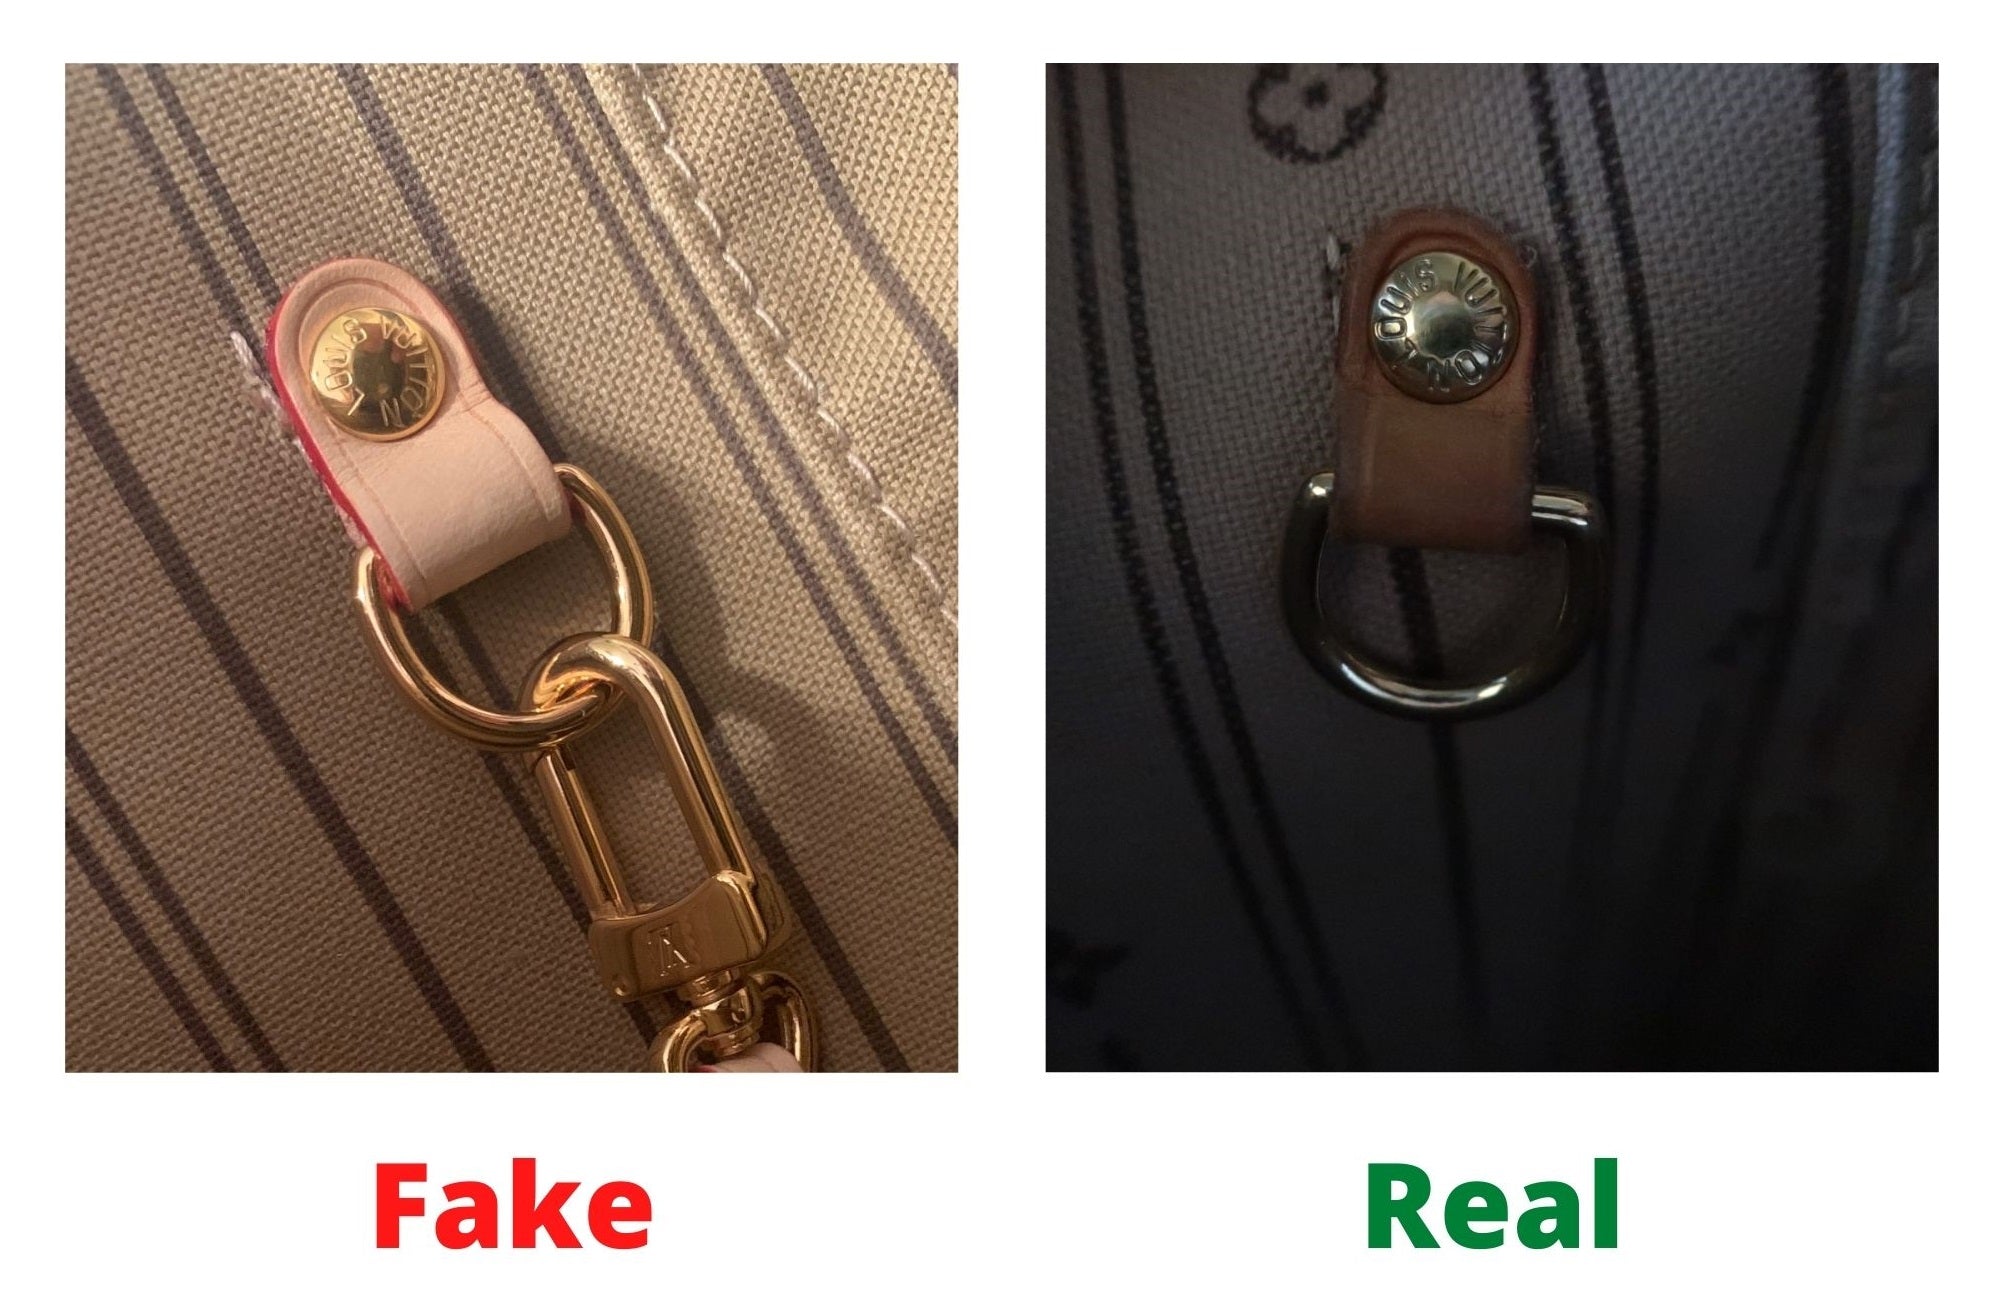 Louis Vuitton Neverfull MM: Fake vs Real Comparison That'll Blow